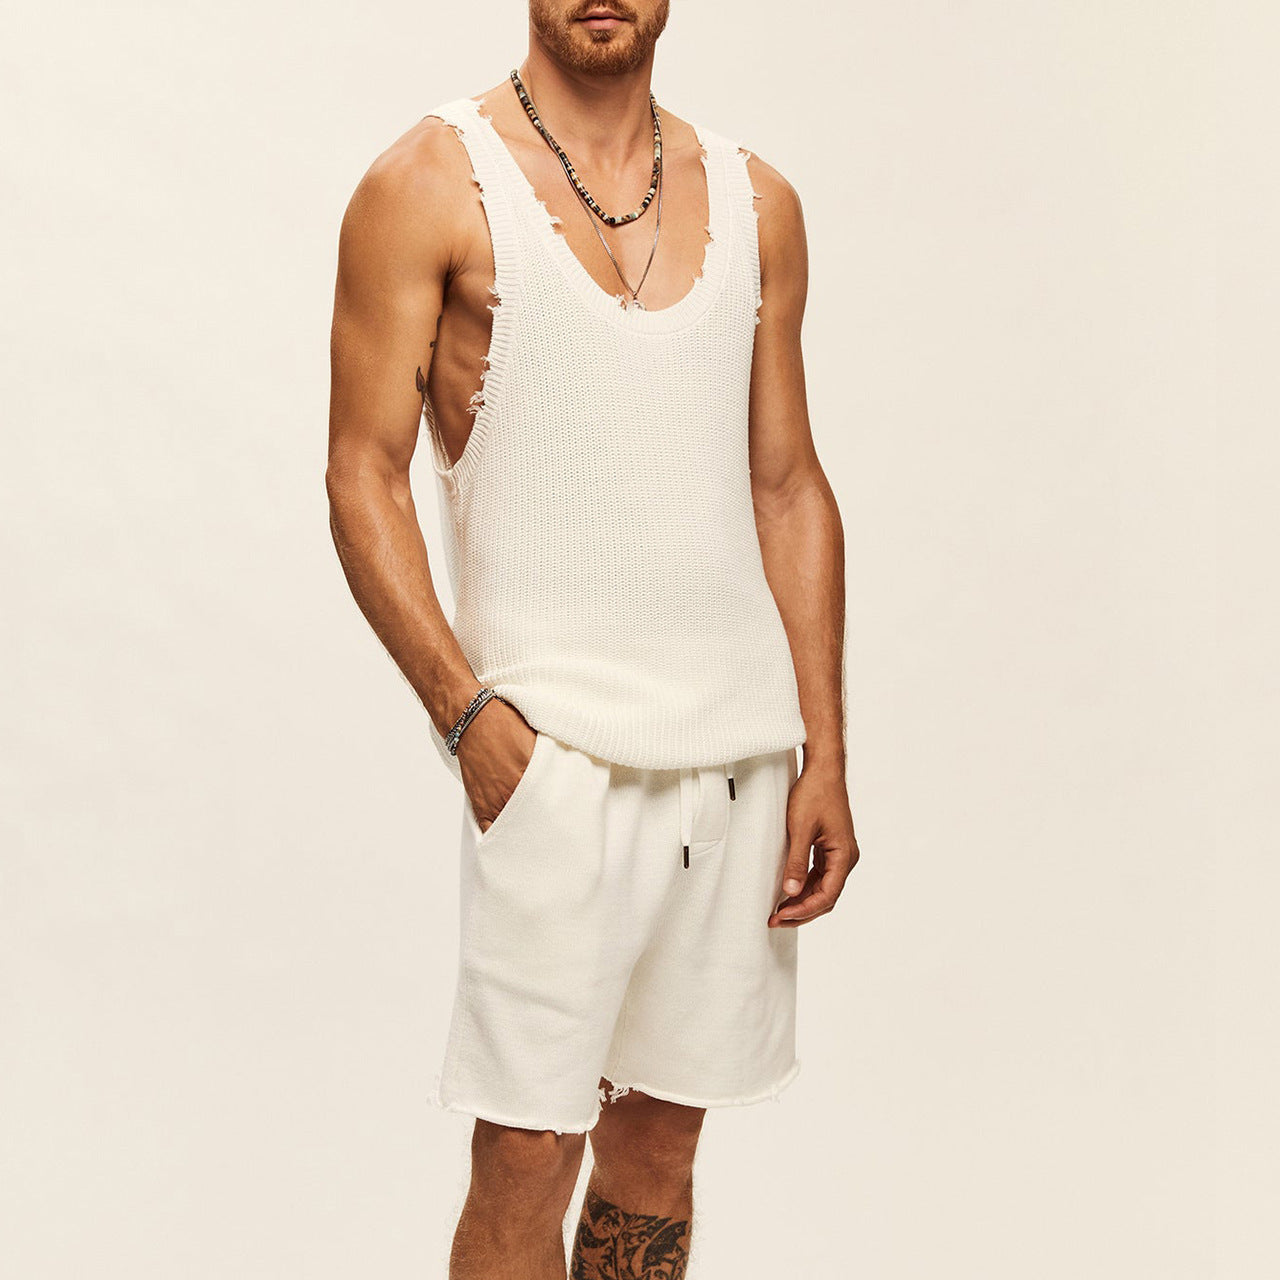 Men's Two-piece Knitted Sleeveless Tank Top Shorts